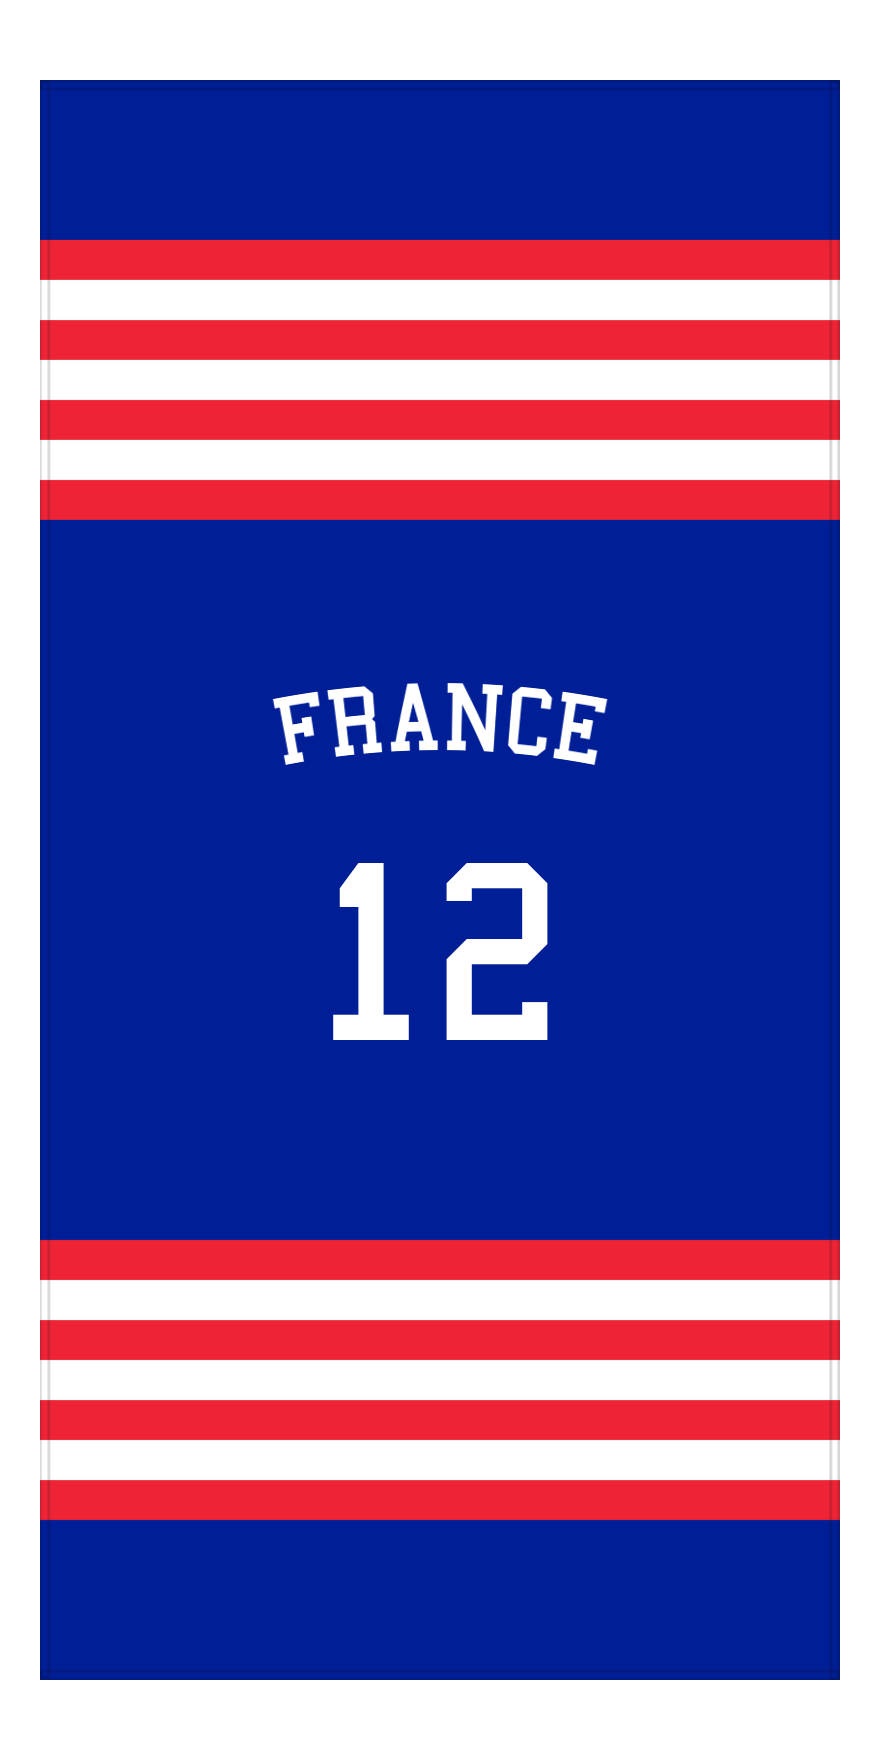 Personalized Jersey Number 3-on-1 Stripes Sports Beach Towel with Arched Name - France - Vertical Design - Front View